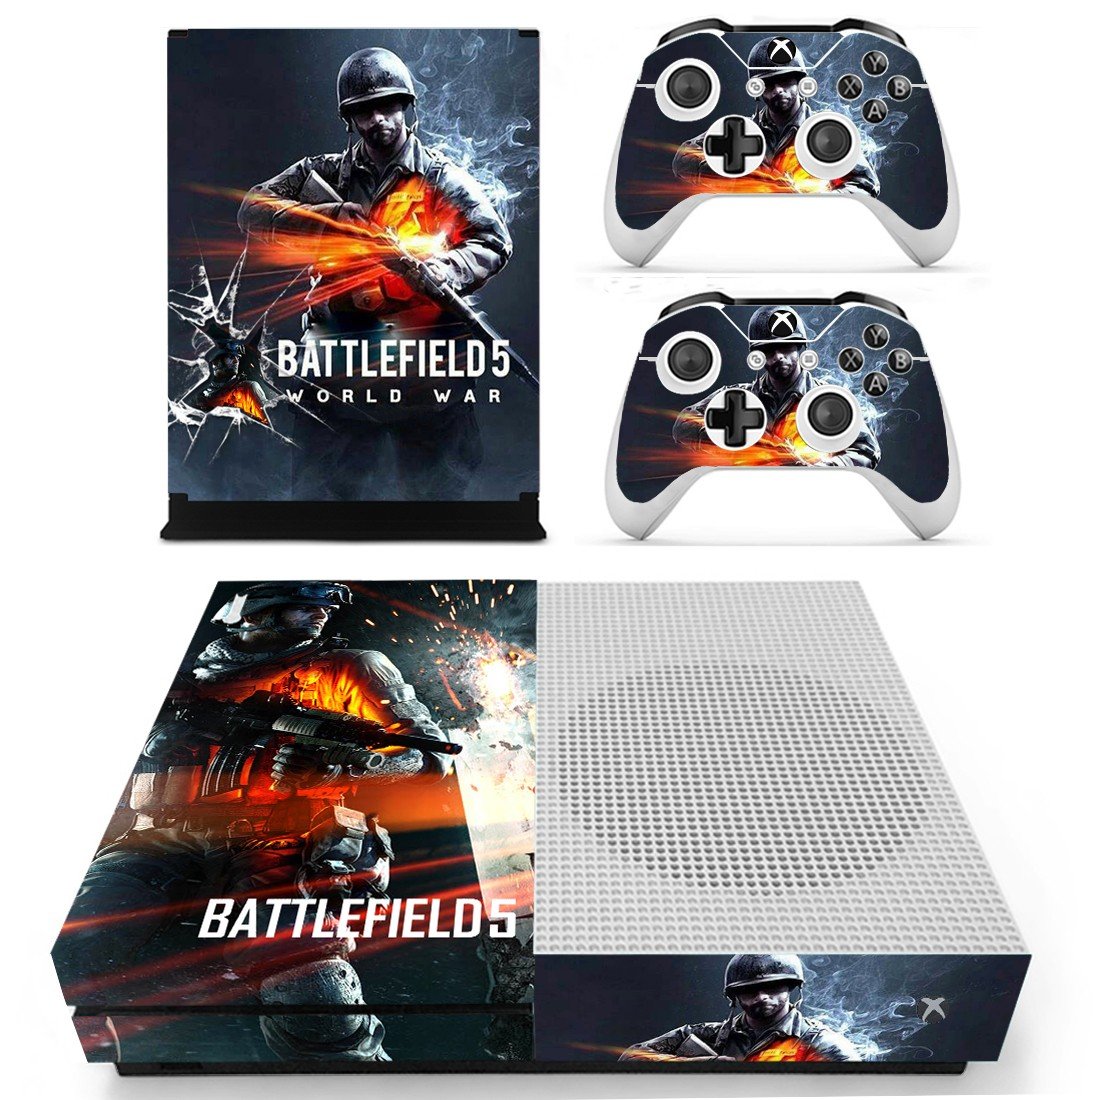 Xbox One S And Controllers Skin Sticker - Battlefield 5